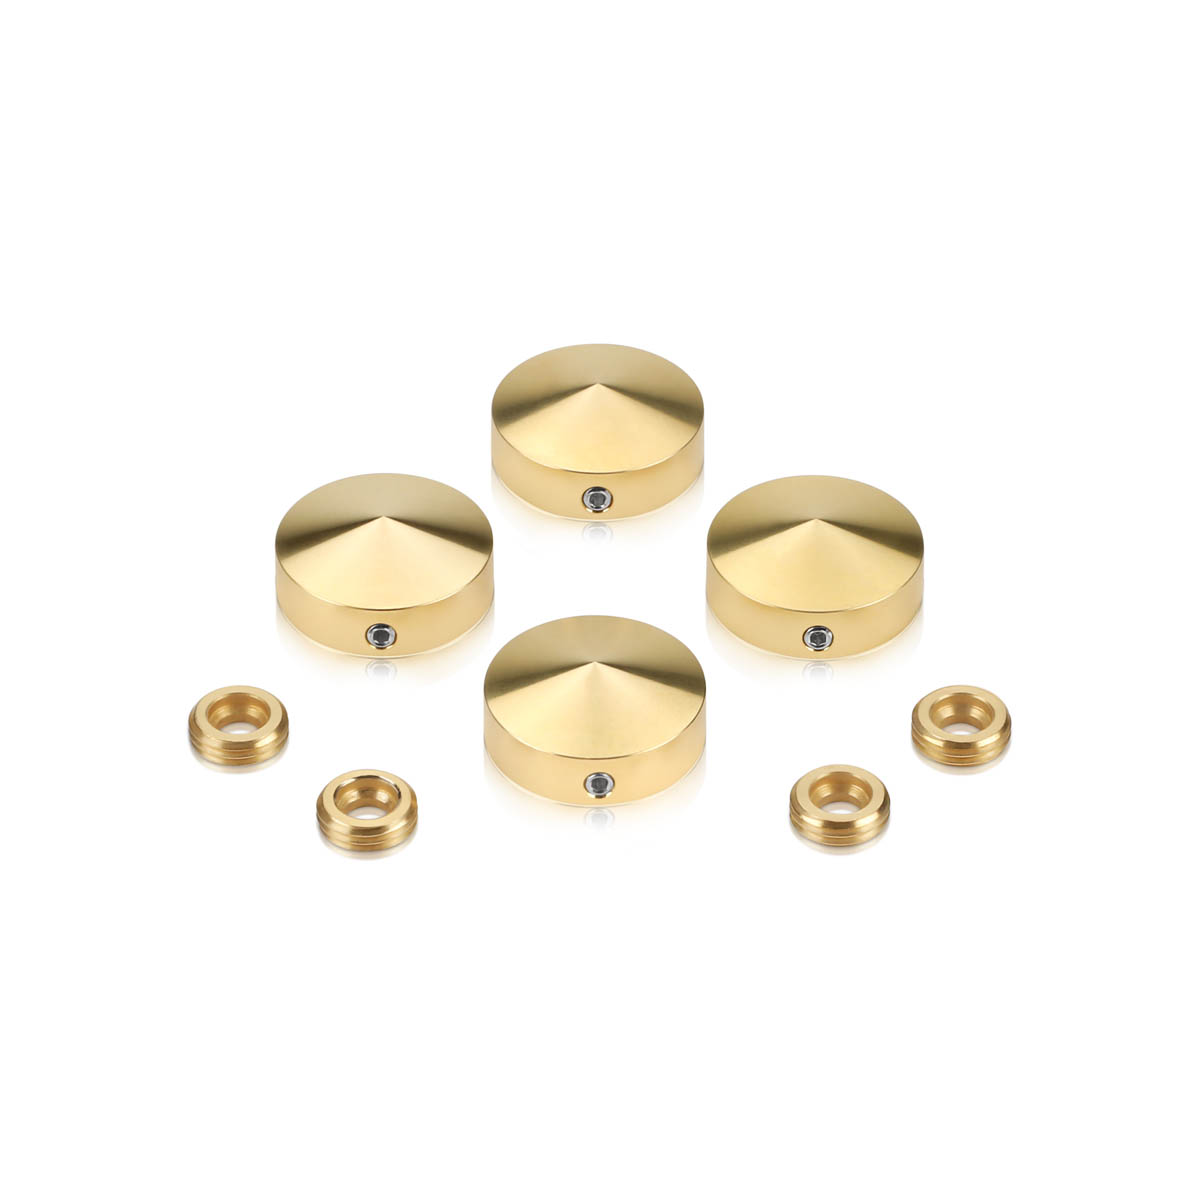 Set of 4 Conical Locking Screw Cover, Diameter: 7/8'' Brass Plain Finish (Indoor or Outdoor Use, but for outdoor use Brass will come darker if no varnish applied)